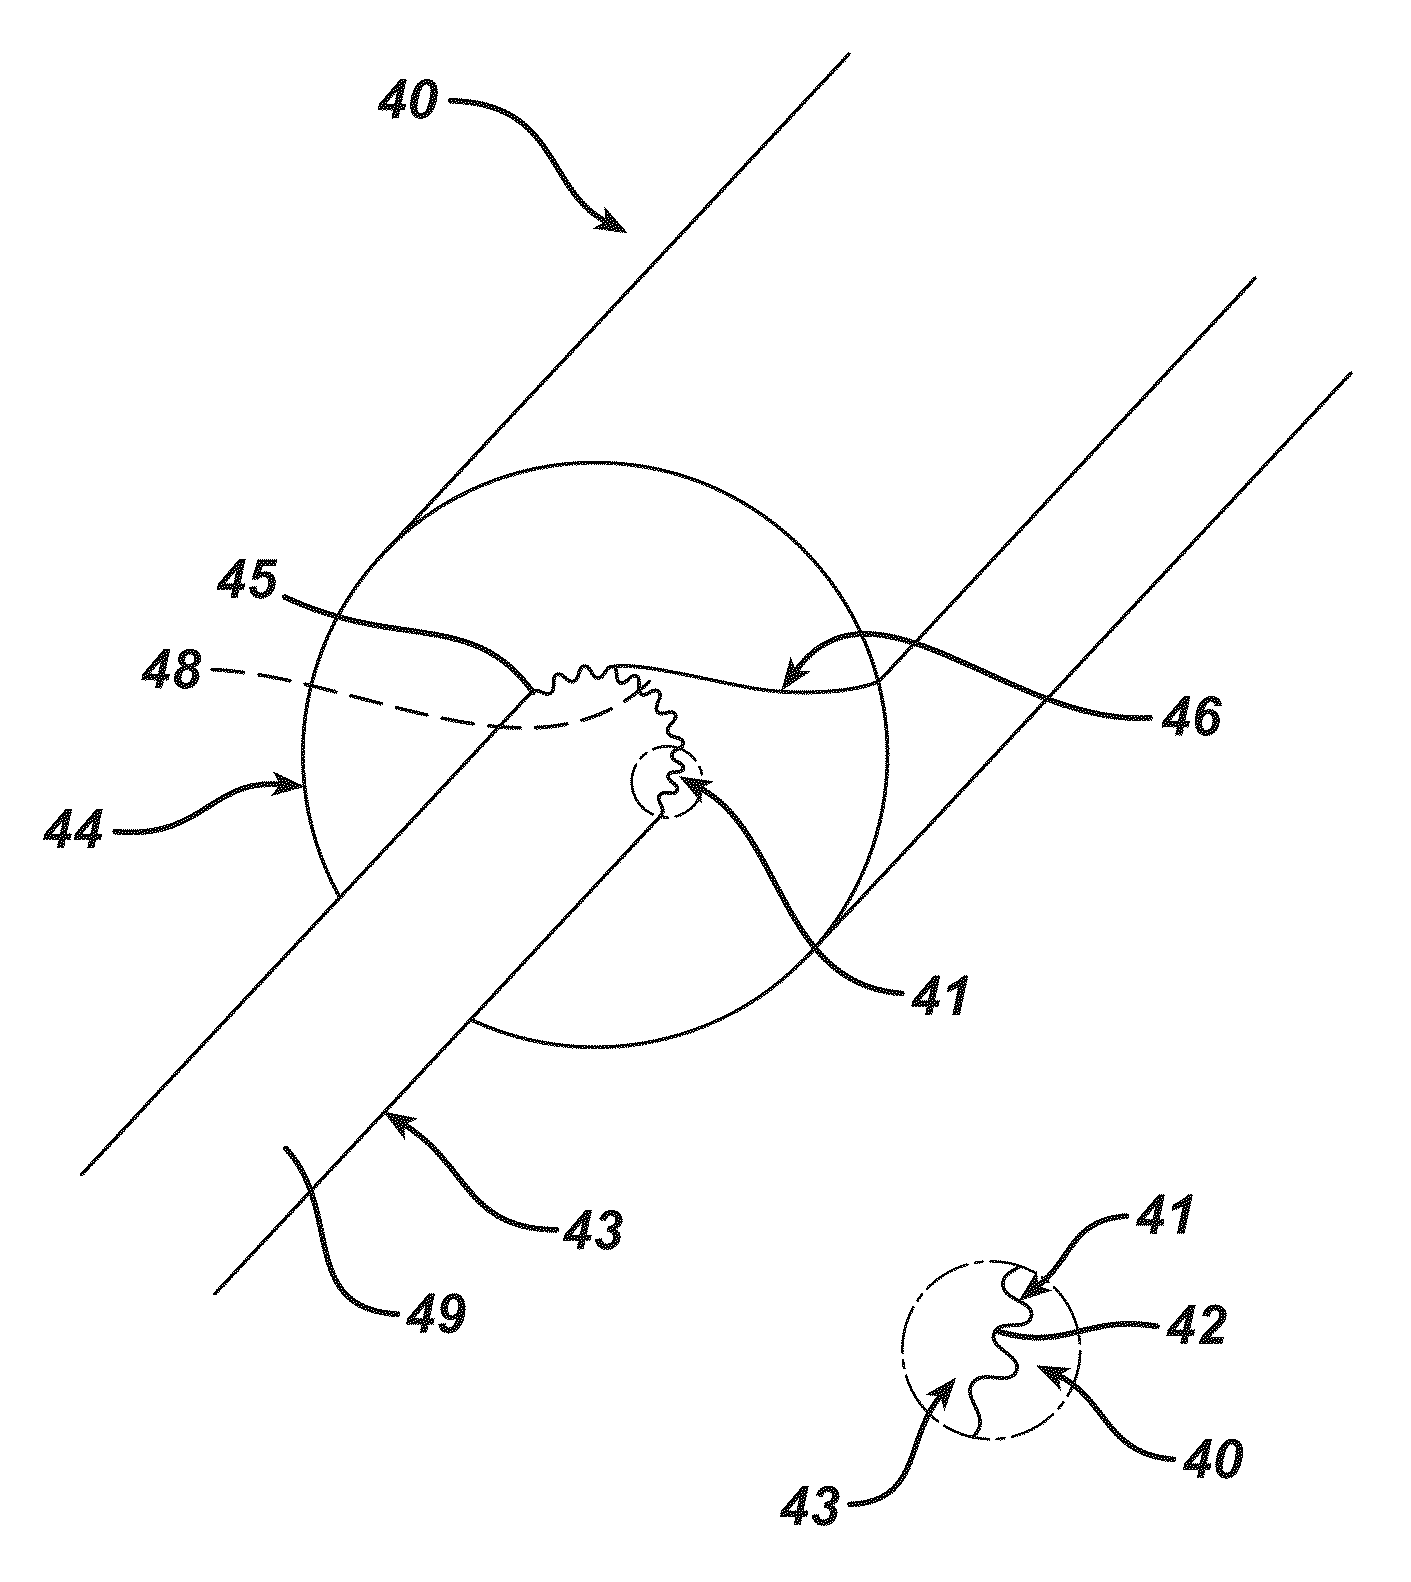 Methods and devices for preventing catheter related urinary tract infections